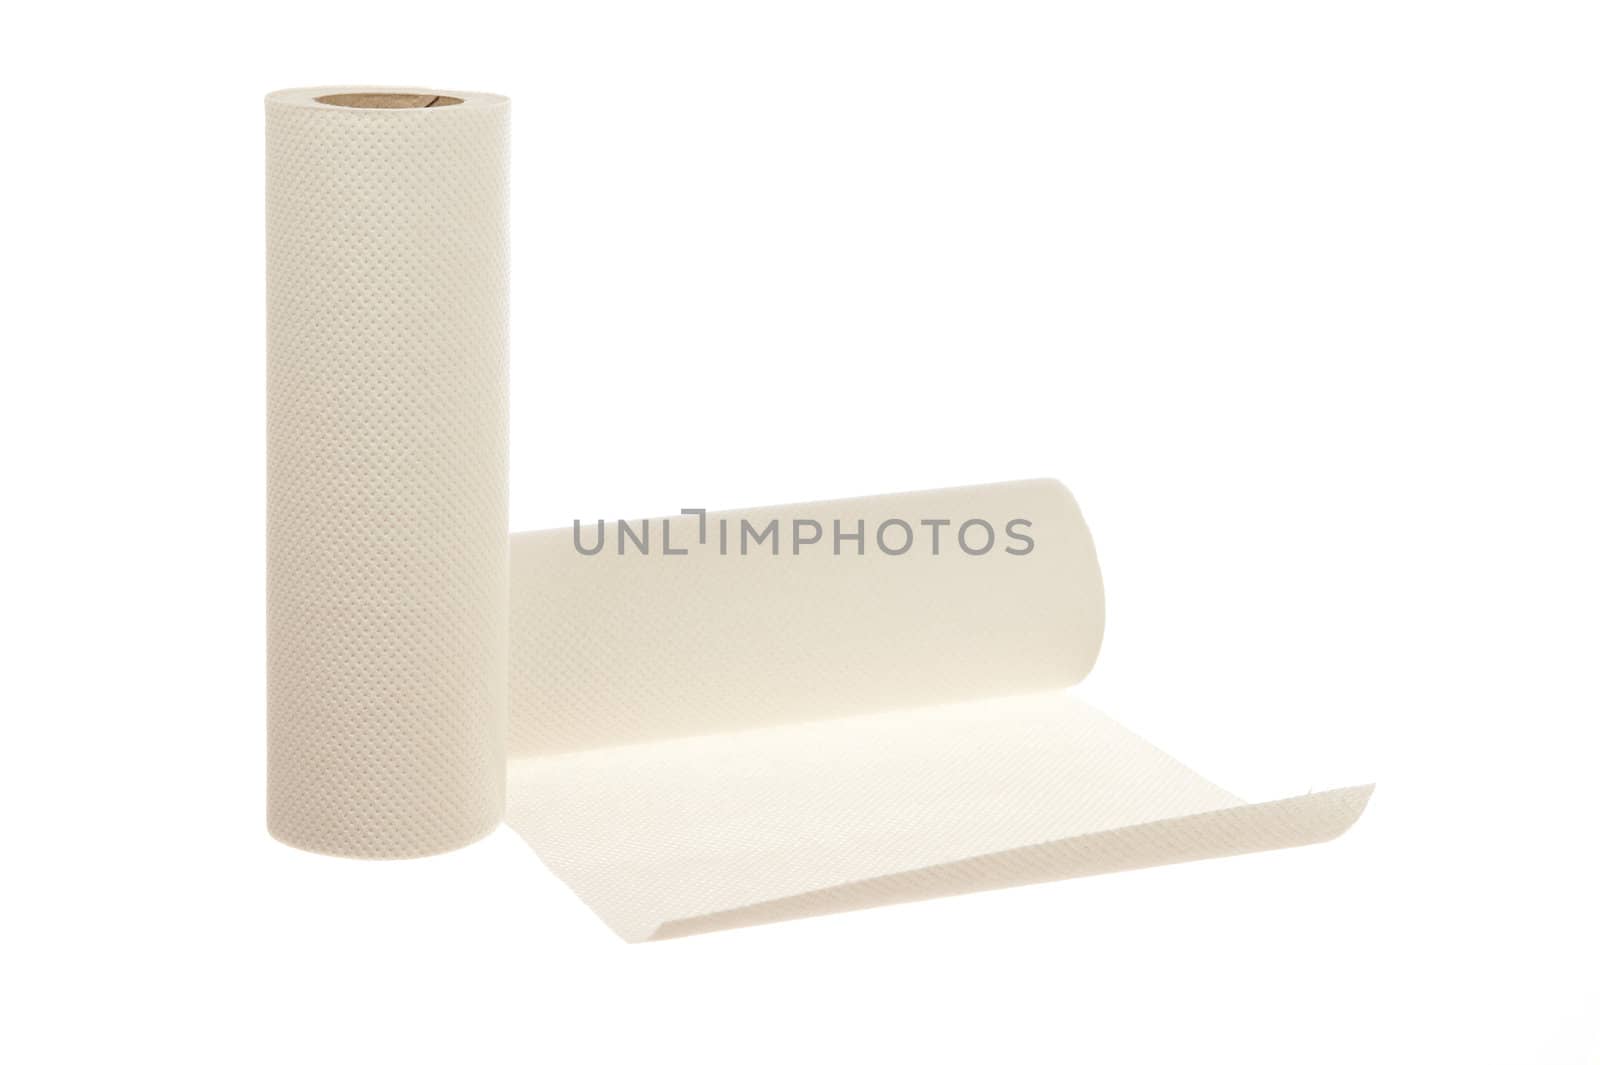 Rolls of paper towel isolated on white background